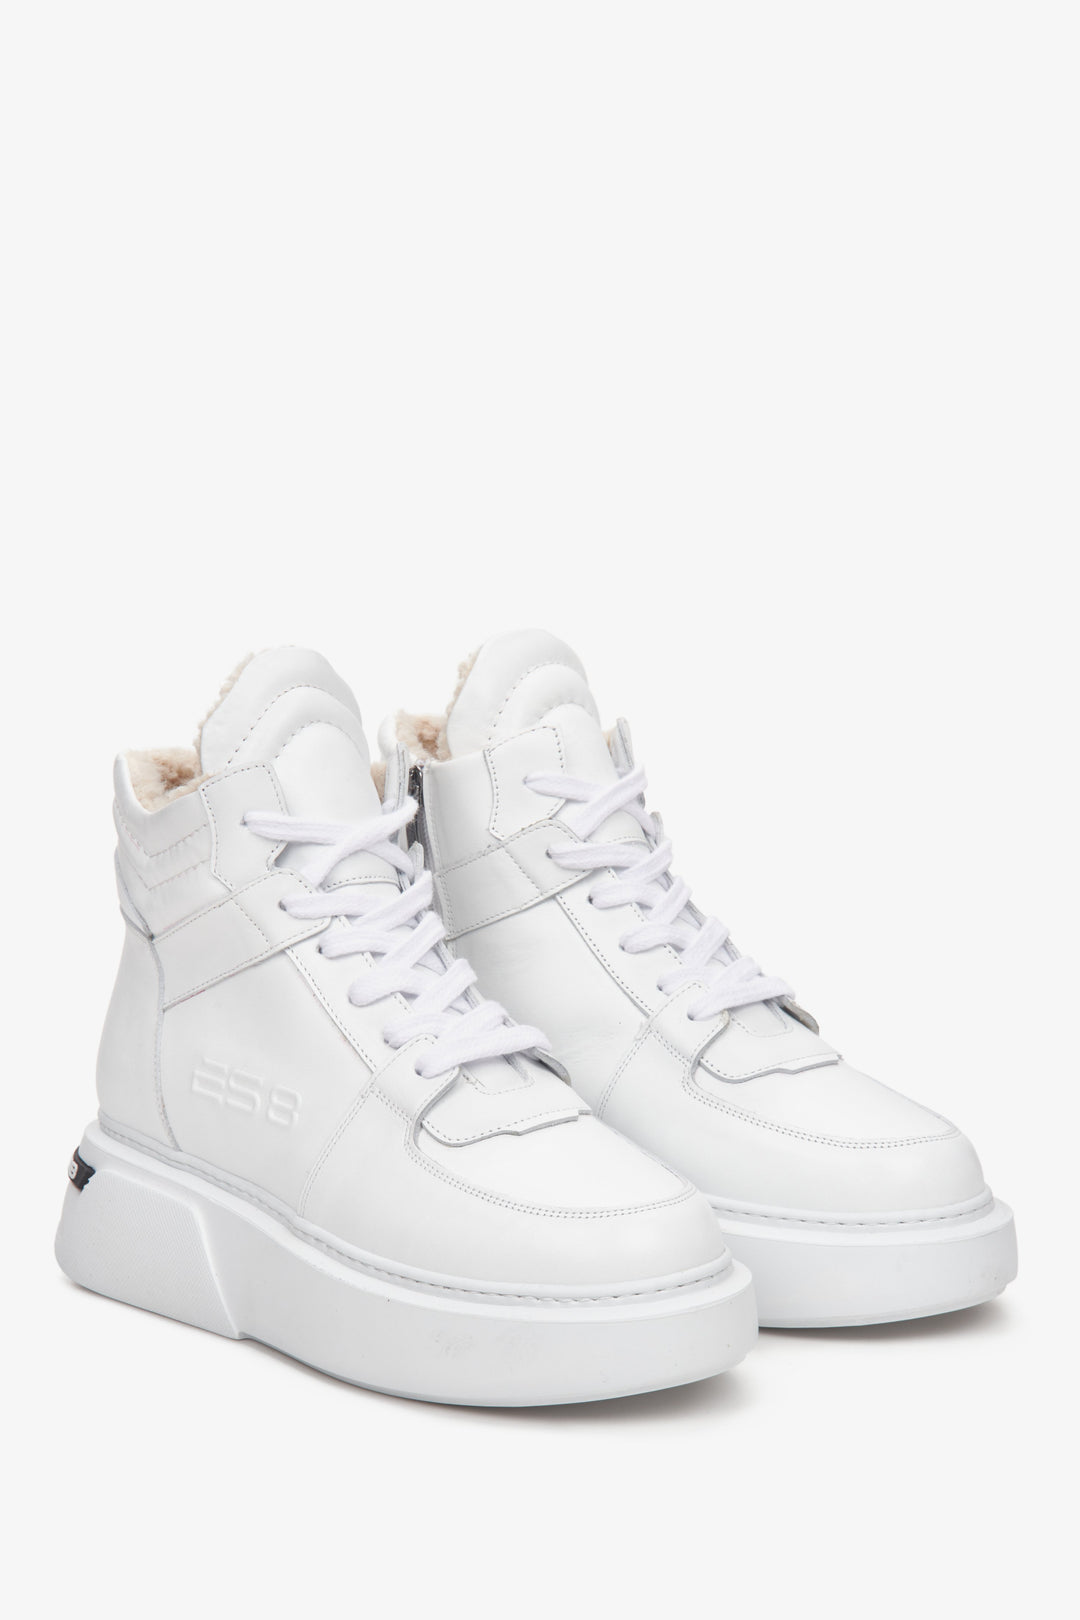 White high-top women's sneakers by Estro natural leather and suede, lace-up.